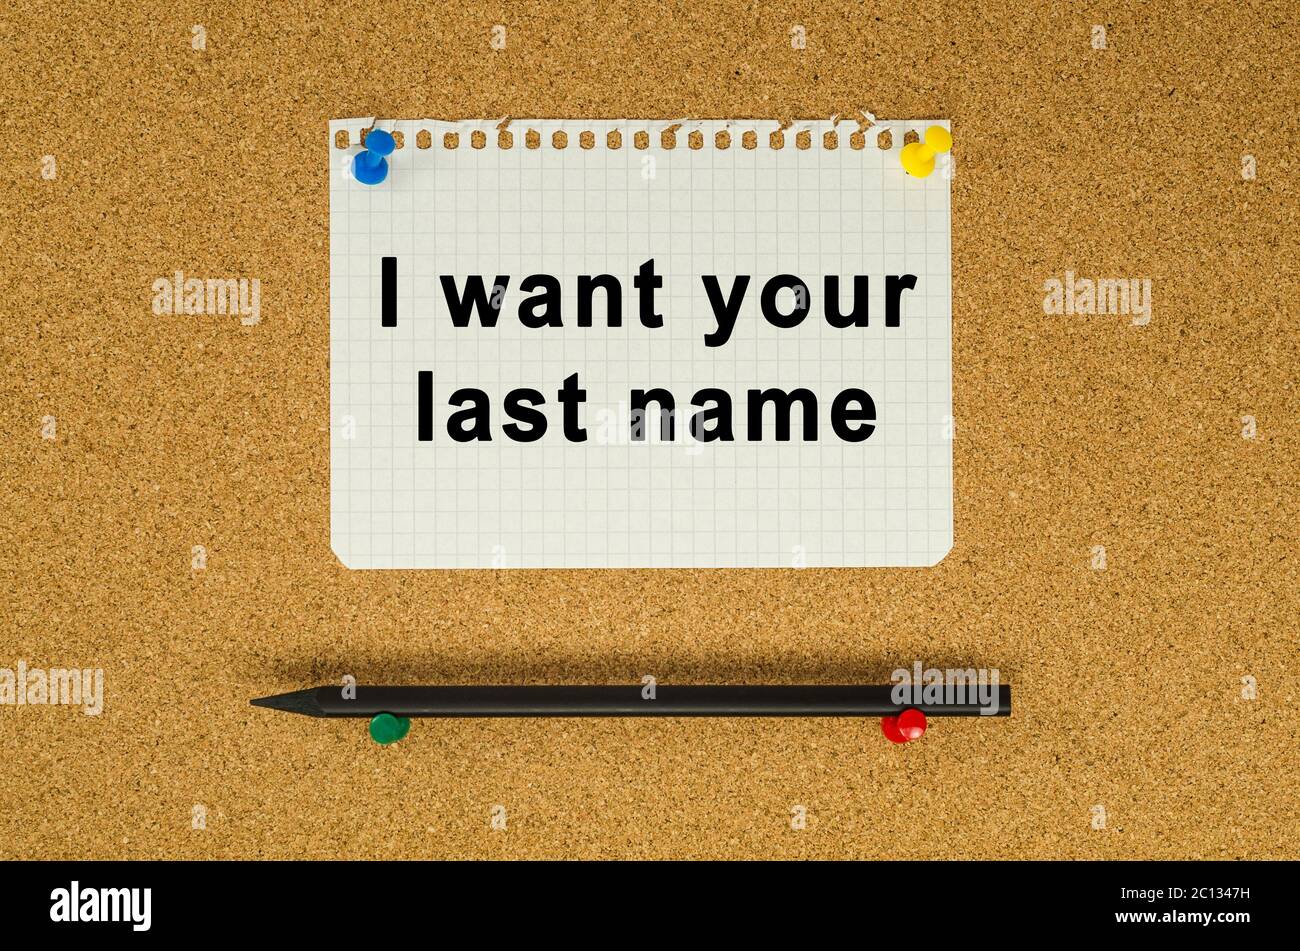 I want your last name text note message pin on bulletin board Stock Photo